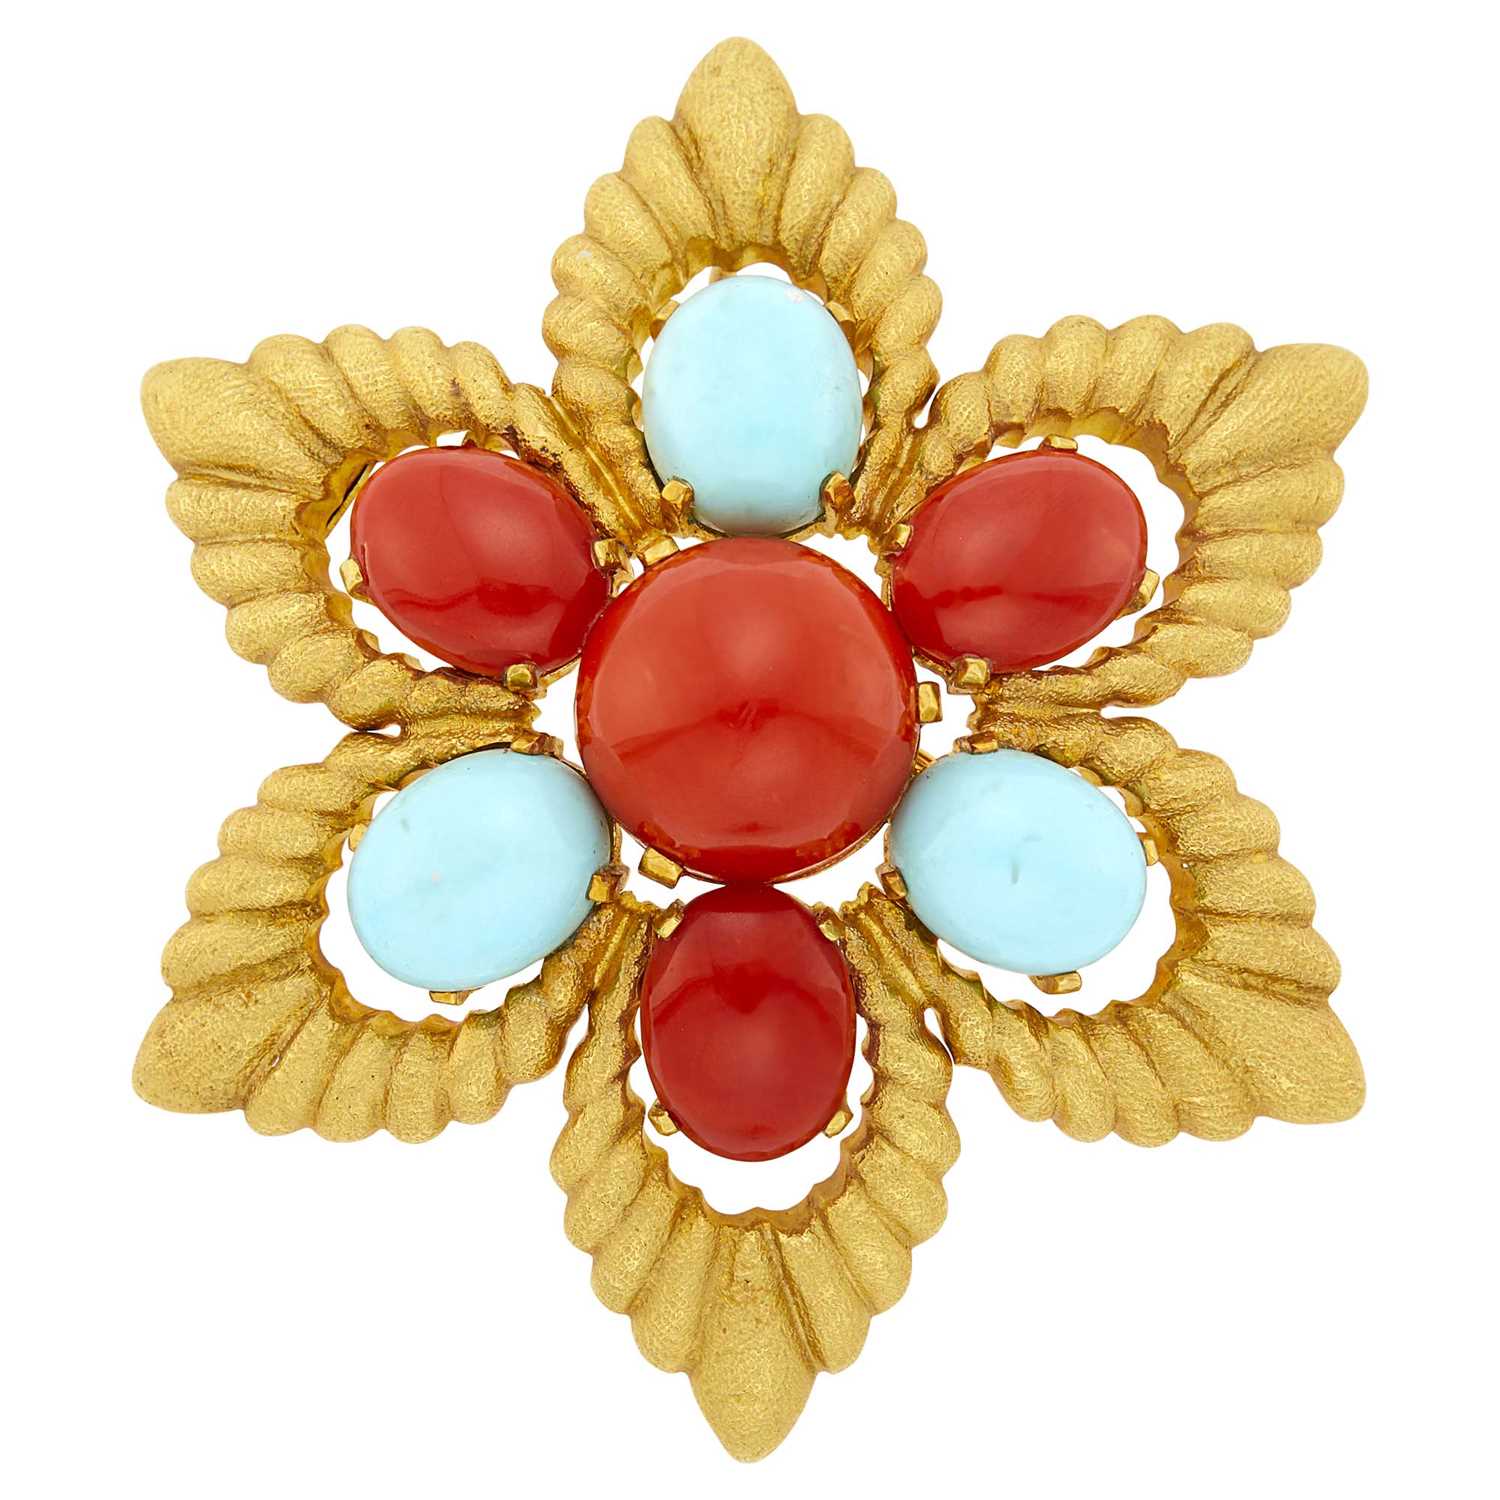 Lot 11 - Gold, Coral and Turquoise Star Pendant Clip-Brooch